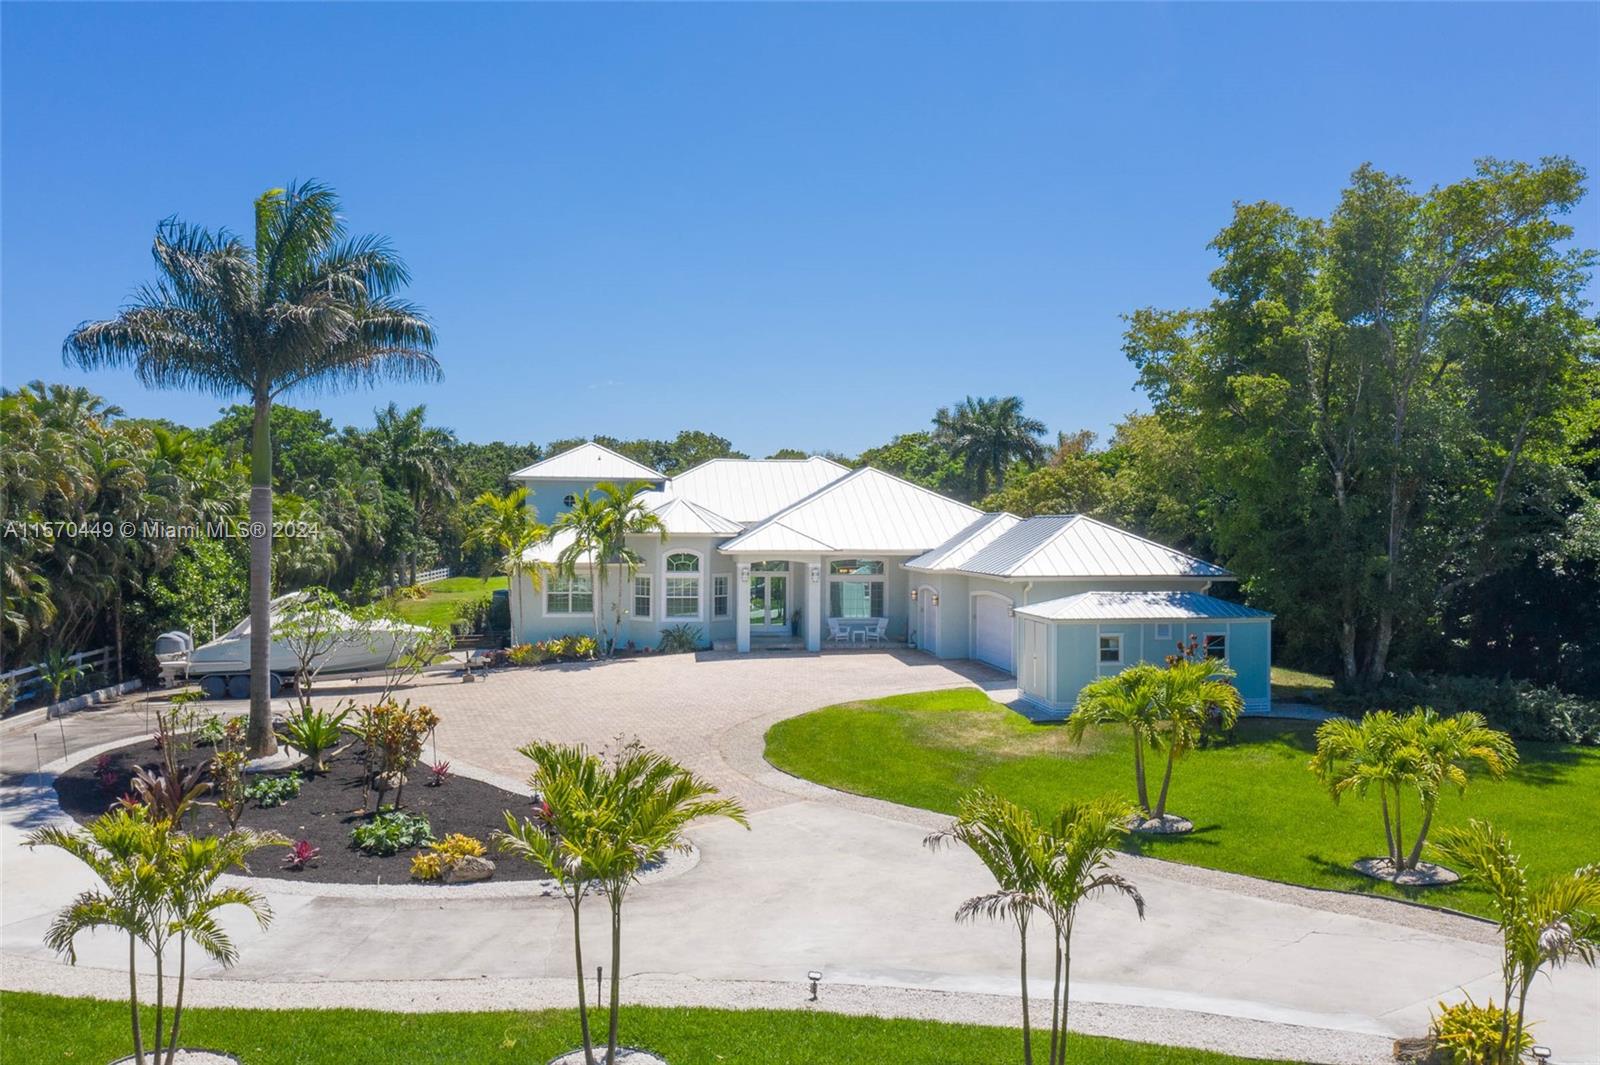 Property for Sale at 14600 Sunset Ln Ln, Southwest Ranches, Broward County, Florida - Bedrooms: 4 
Bathrooms: 5.5  - $2,900,000